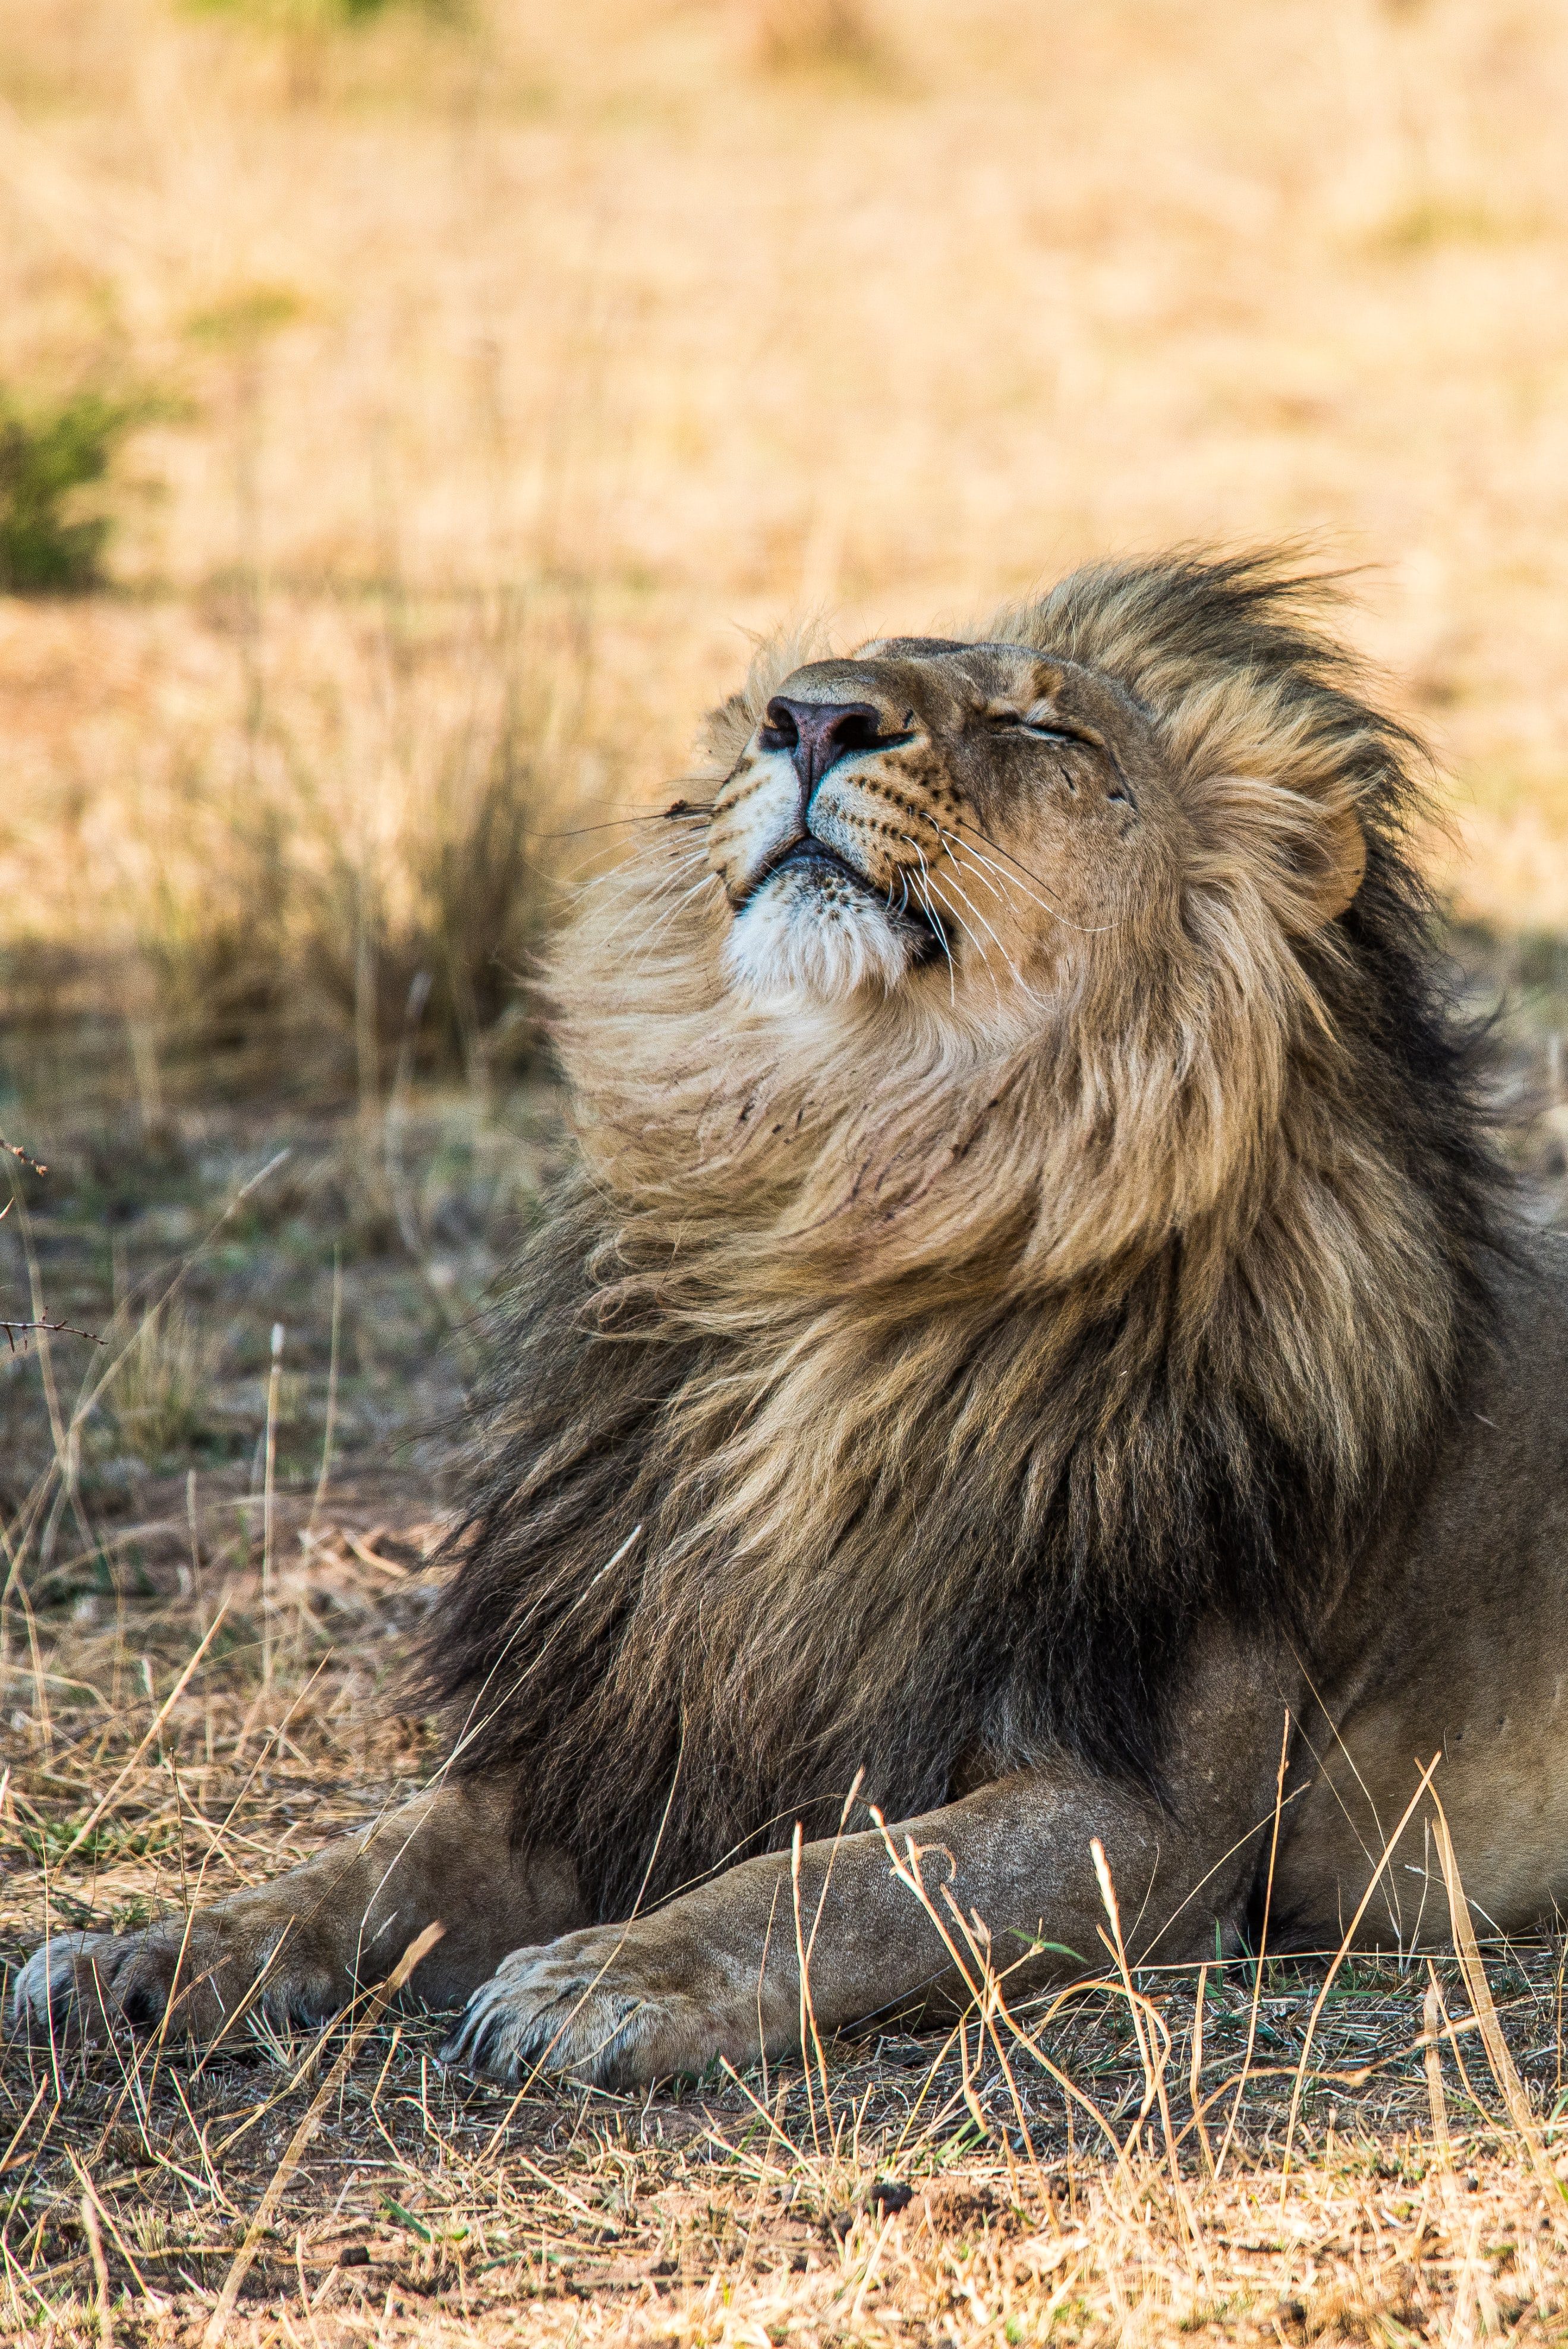 10 cool lion facts: fun info about the kings of the jungle